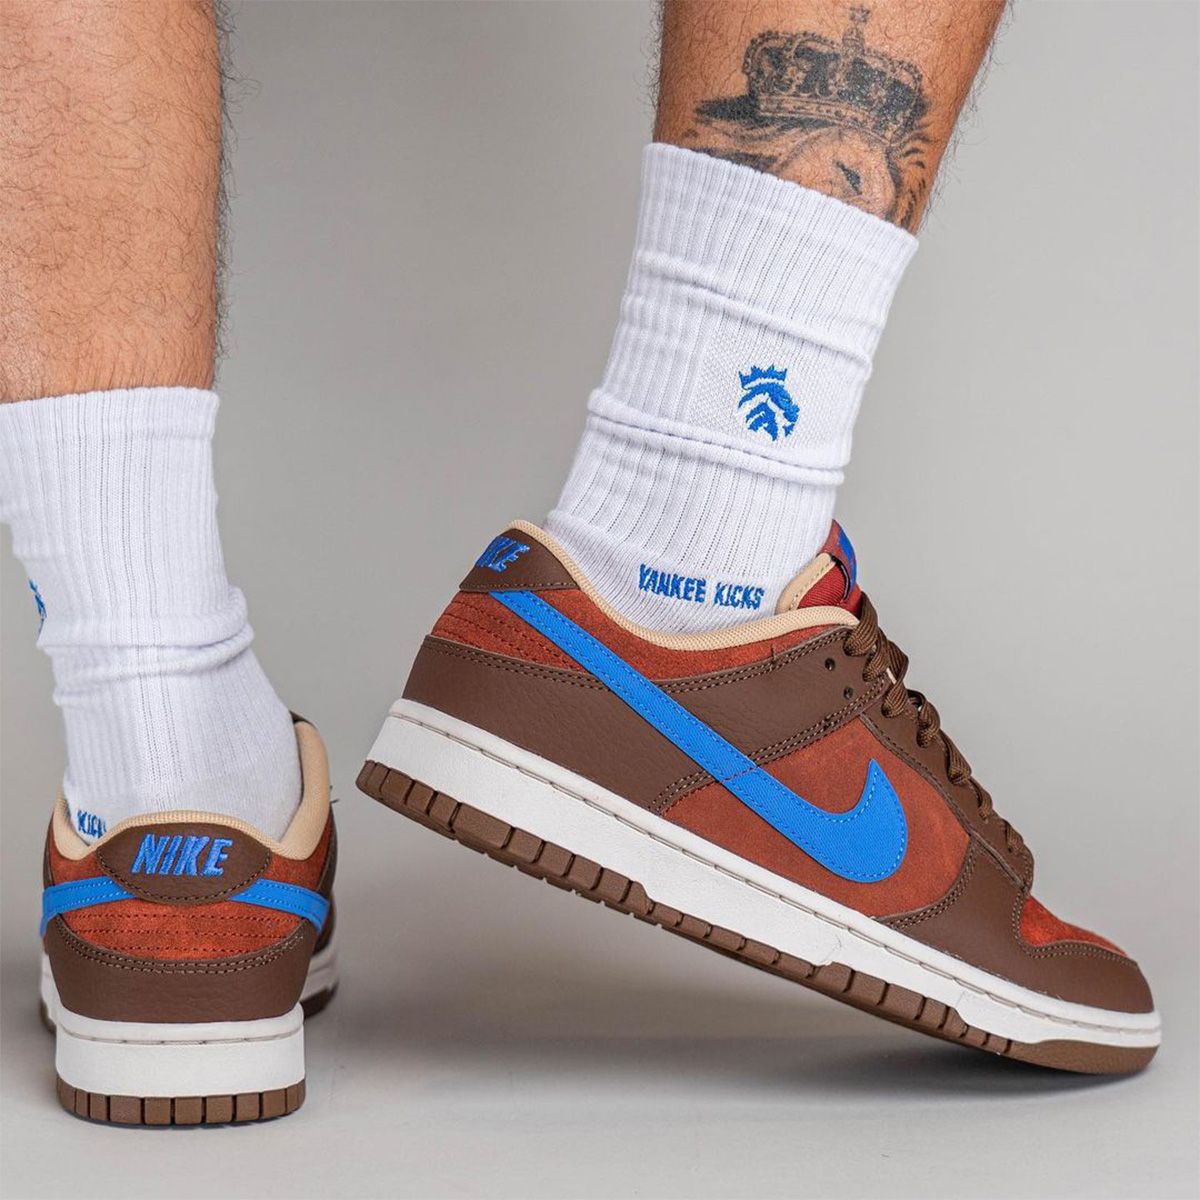 Where to Buy the Nike Dunk Low “Mars Stone” | House of Heat°